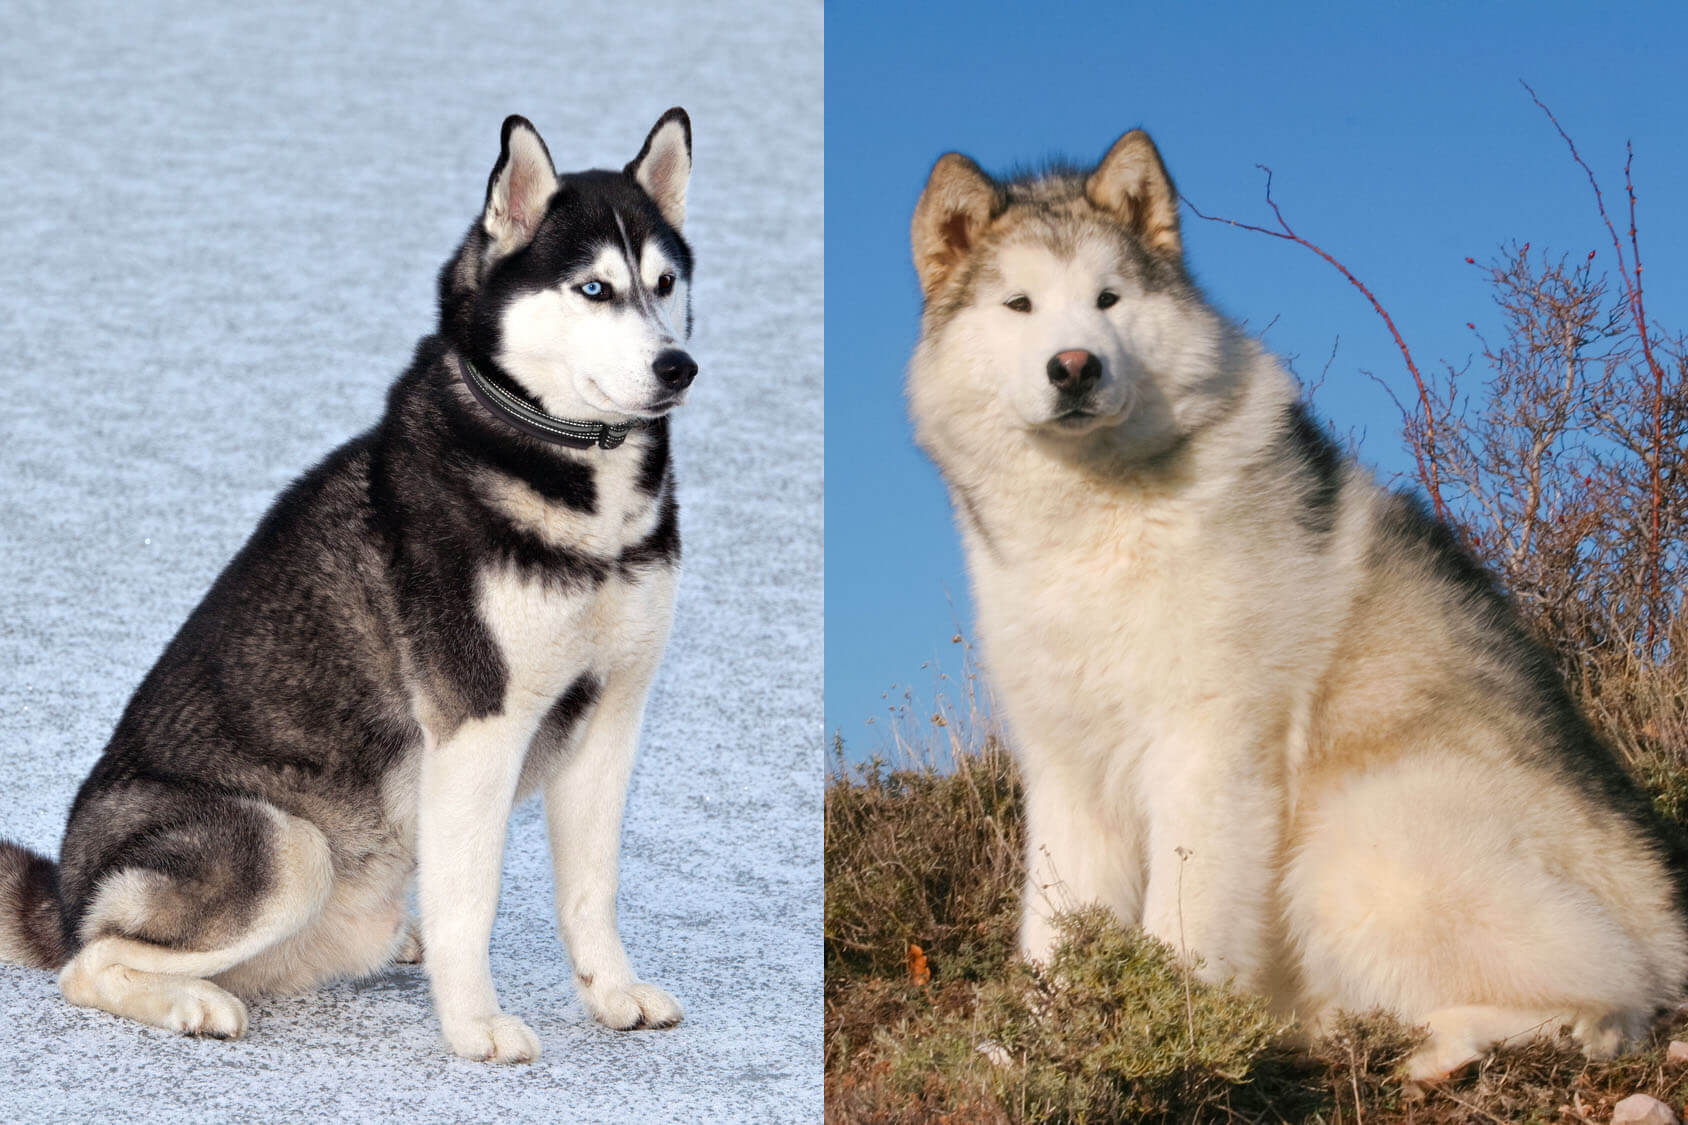 Husky And Malamute: Can You Tell Their Differences? Husky